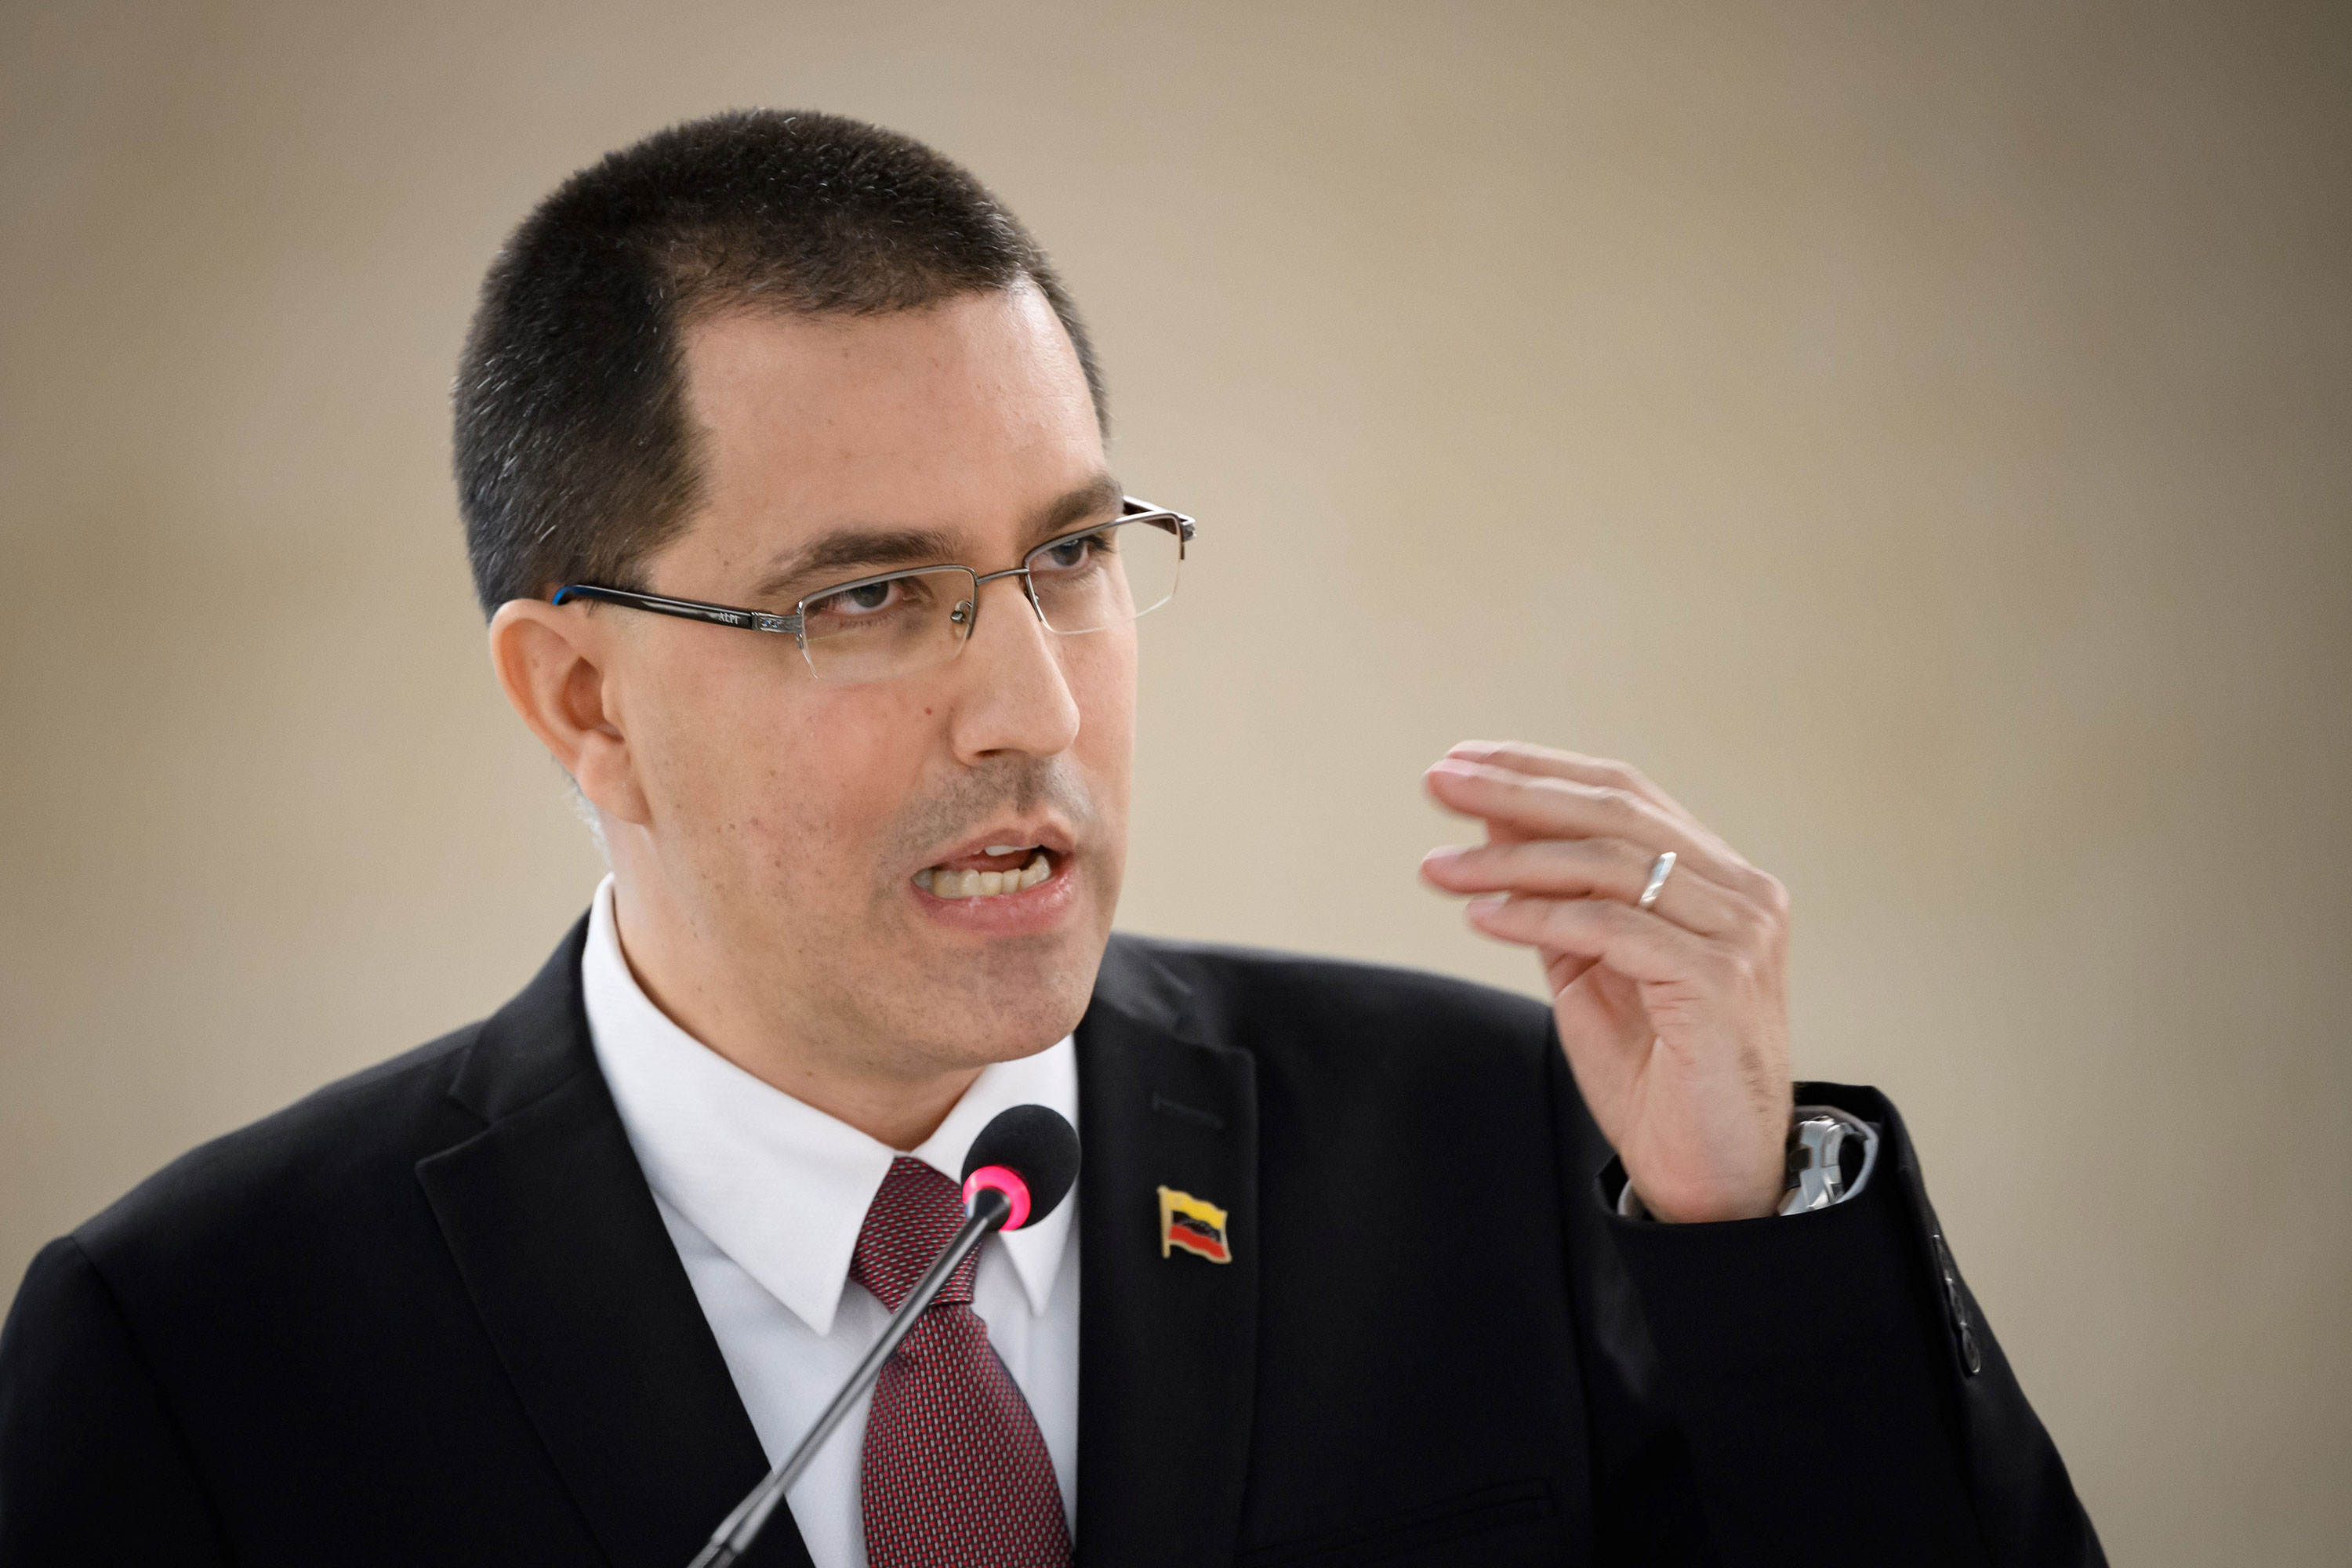 Venezuela's Minister of Foreign Affairs Jorge Arreaza addresses the UN Human Rights Council on February 25 in Geneva.